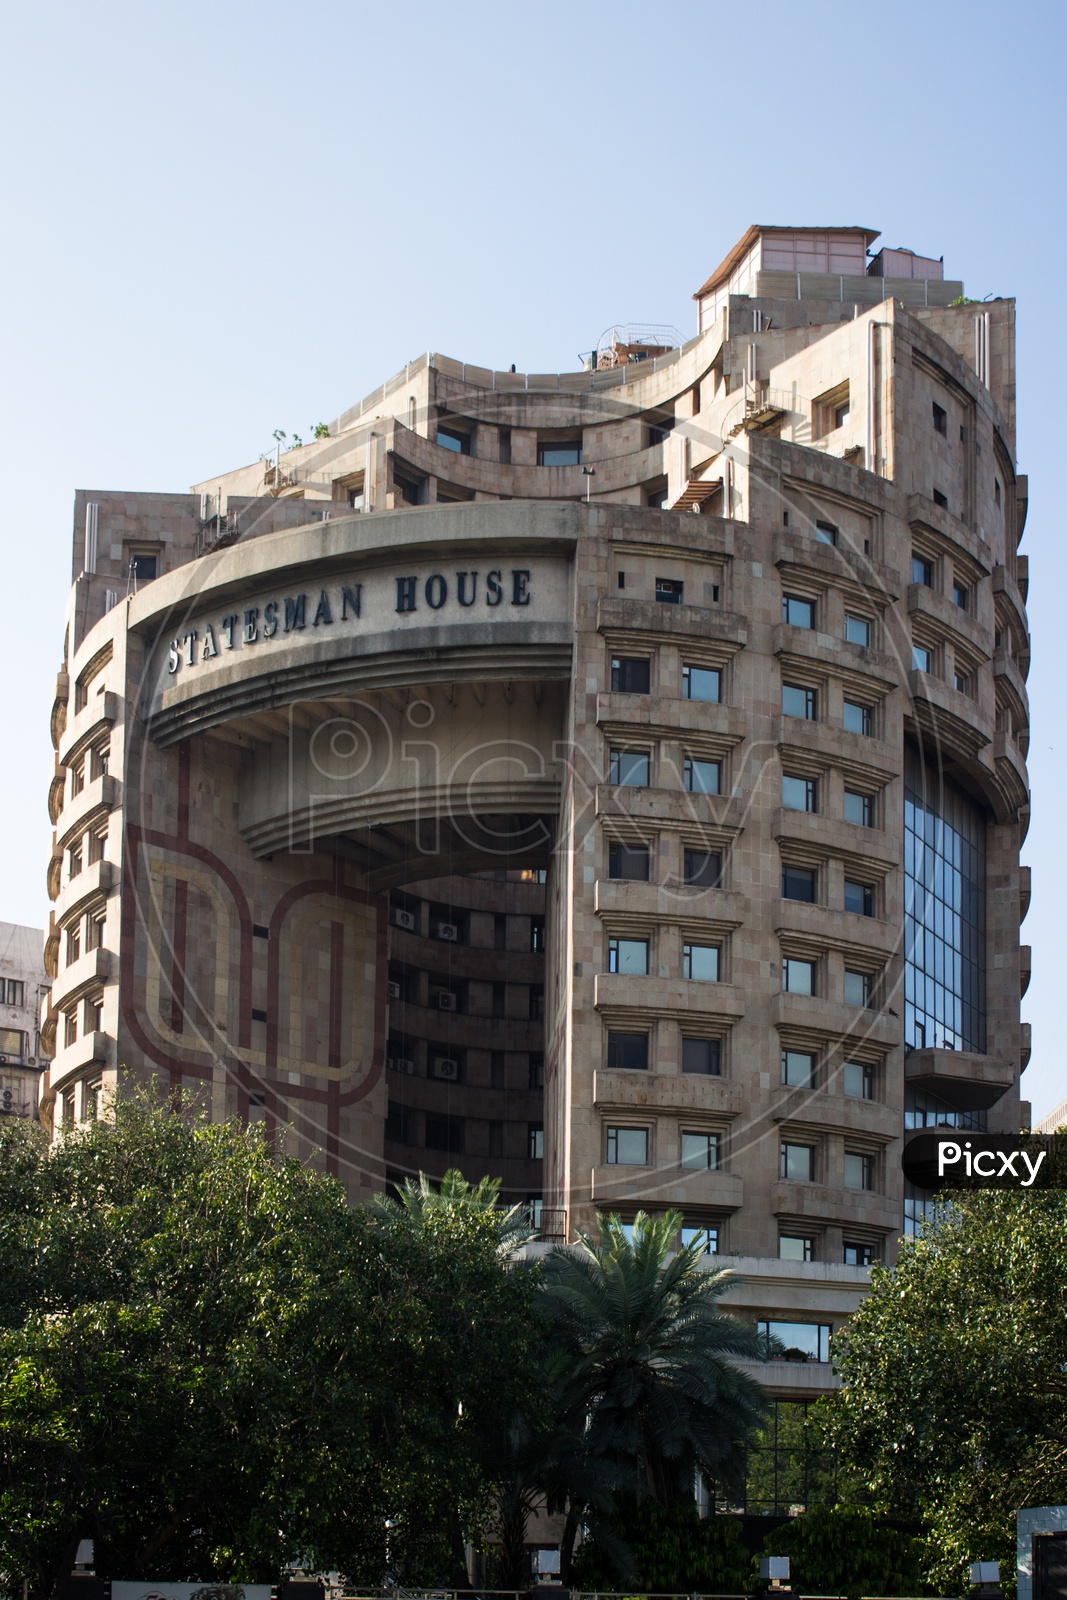 Statesman House commercial building in Barakhamba road near Connaught Place in Delhi